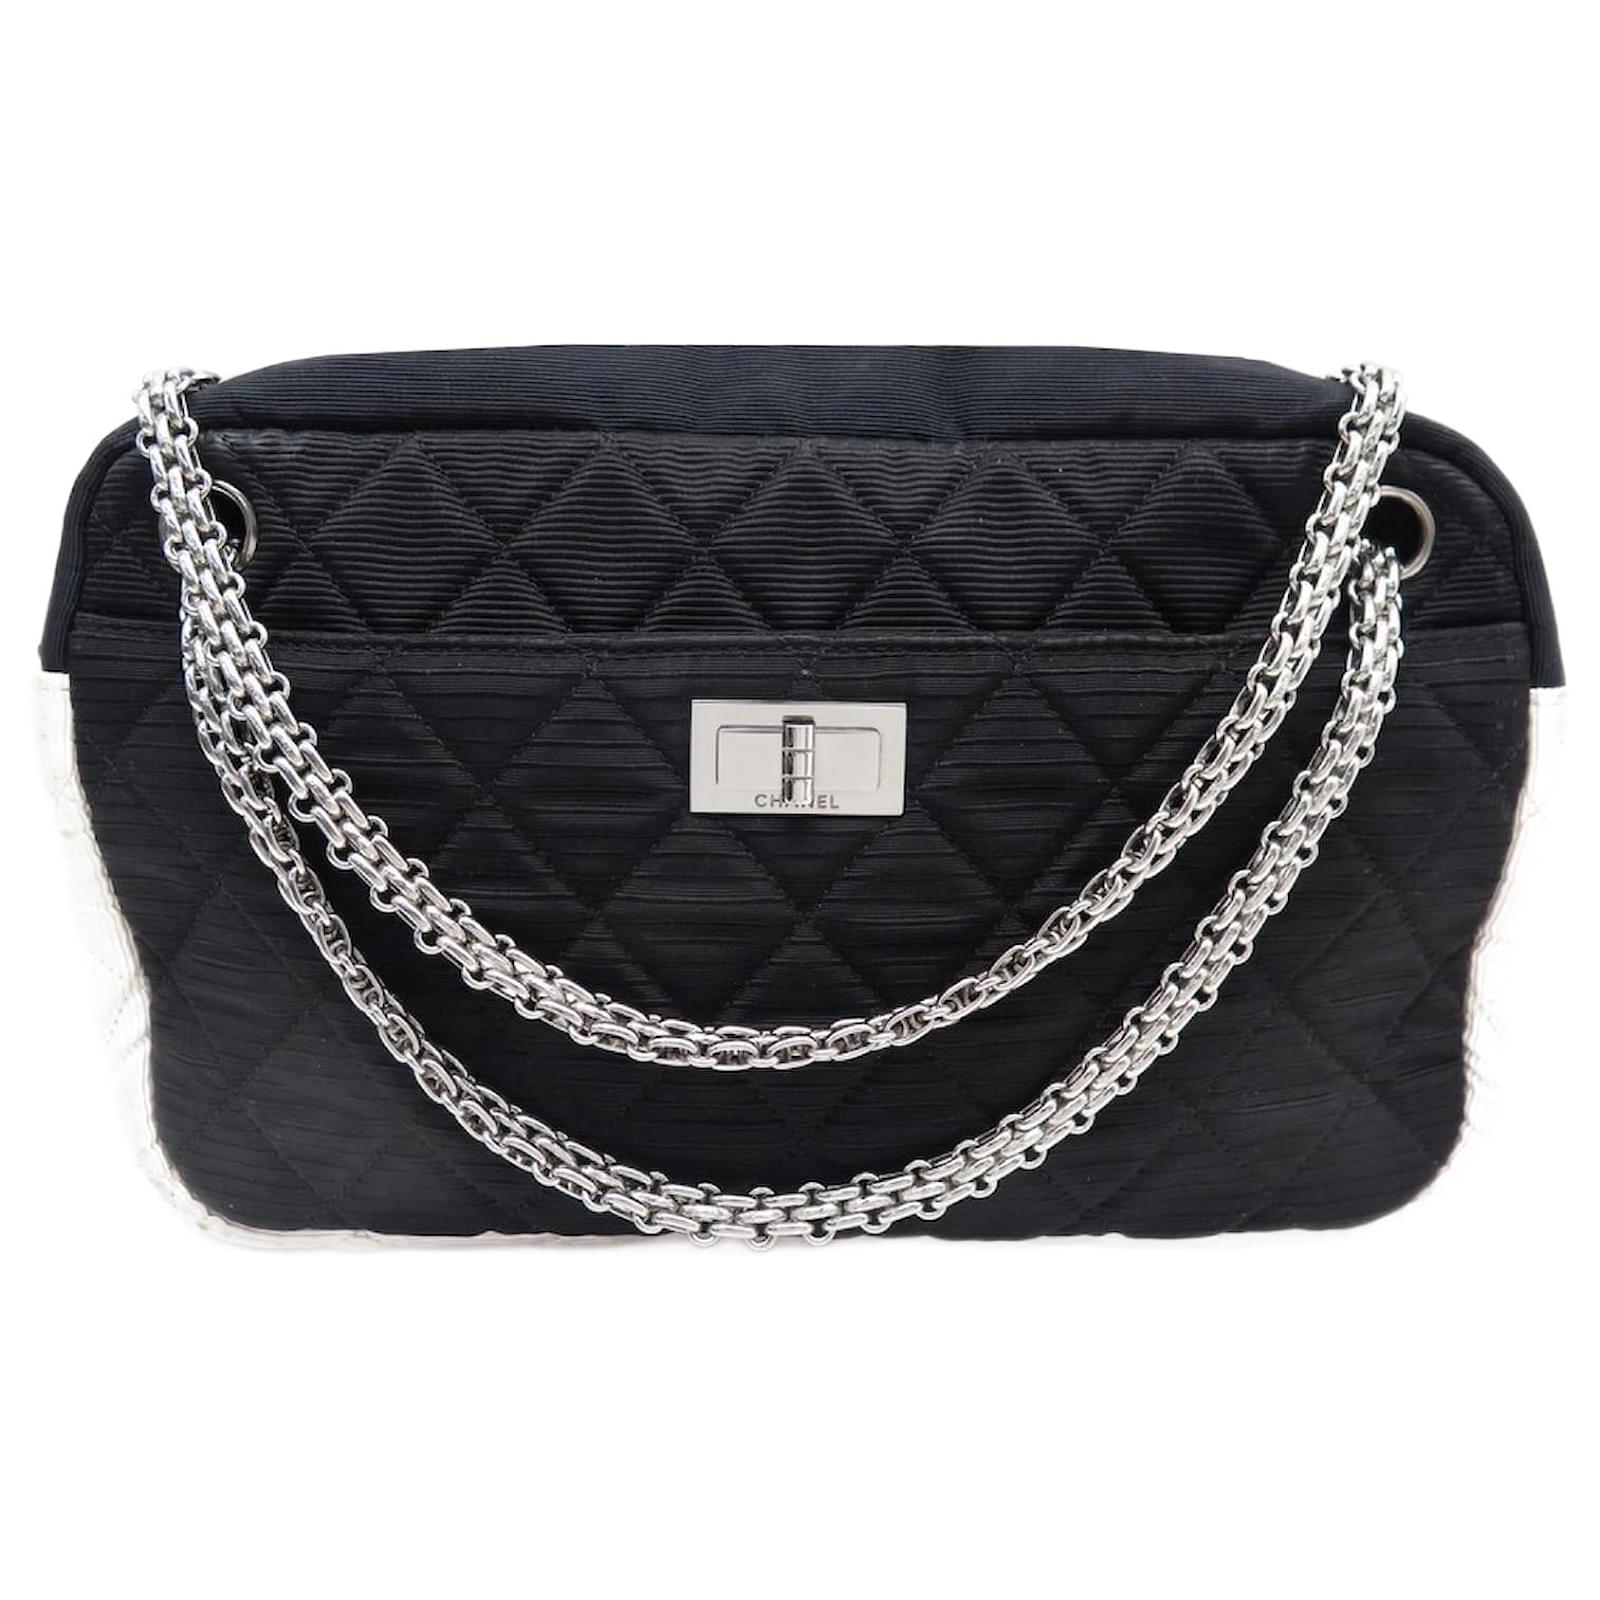 CHANEL CAMERA BAG MADEMOISELLE CLASP IN BLACK WHITE CANVAS HAND BAG